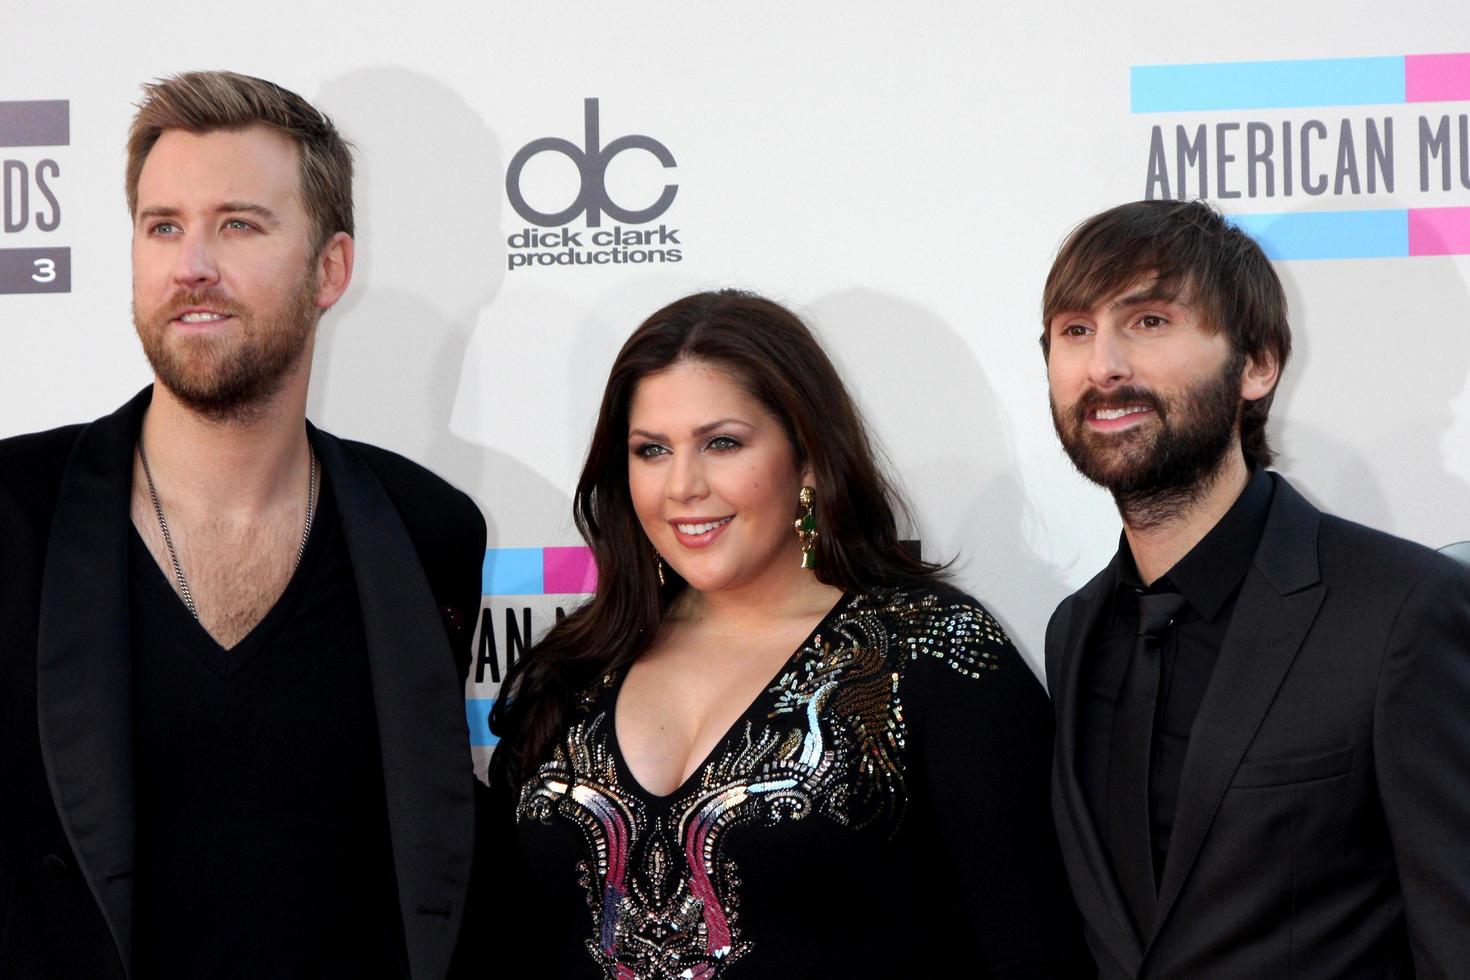 LOS ANGELES, NOV 24 -  Lady Antebellum at the 2013 American Music Awards Arrivals at Nokia Theater on November 24, 2013 in Los Angeles, CA photo